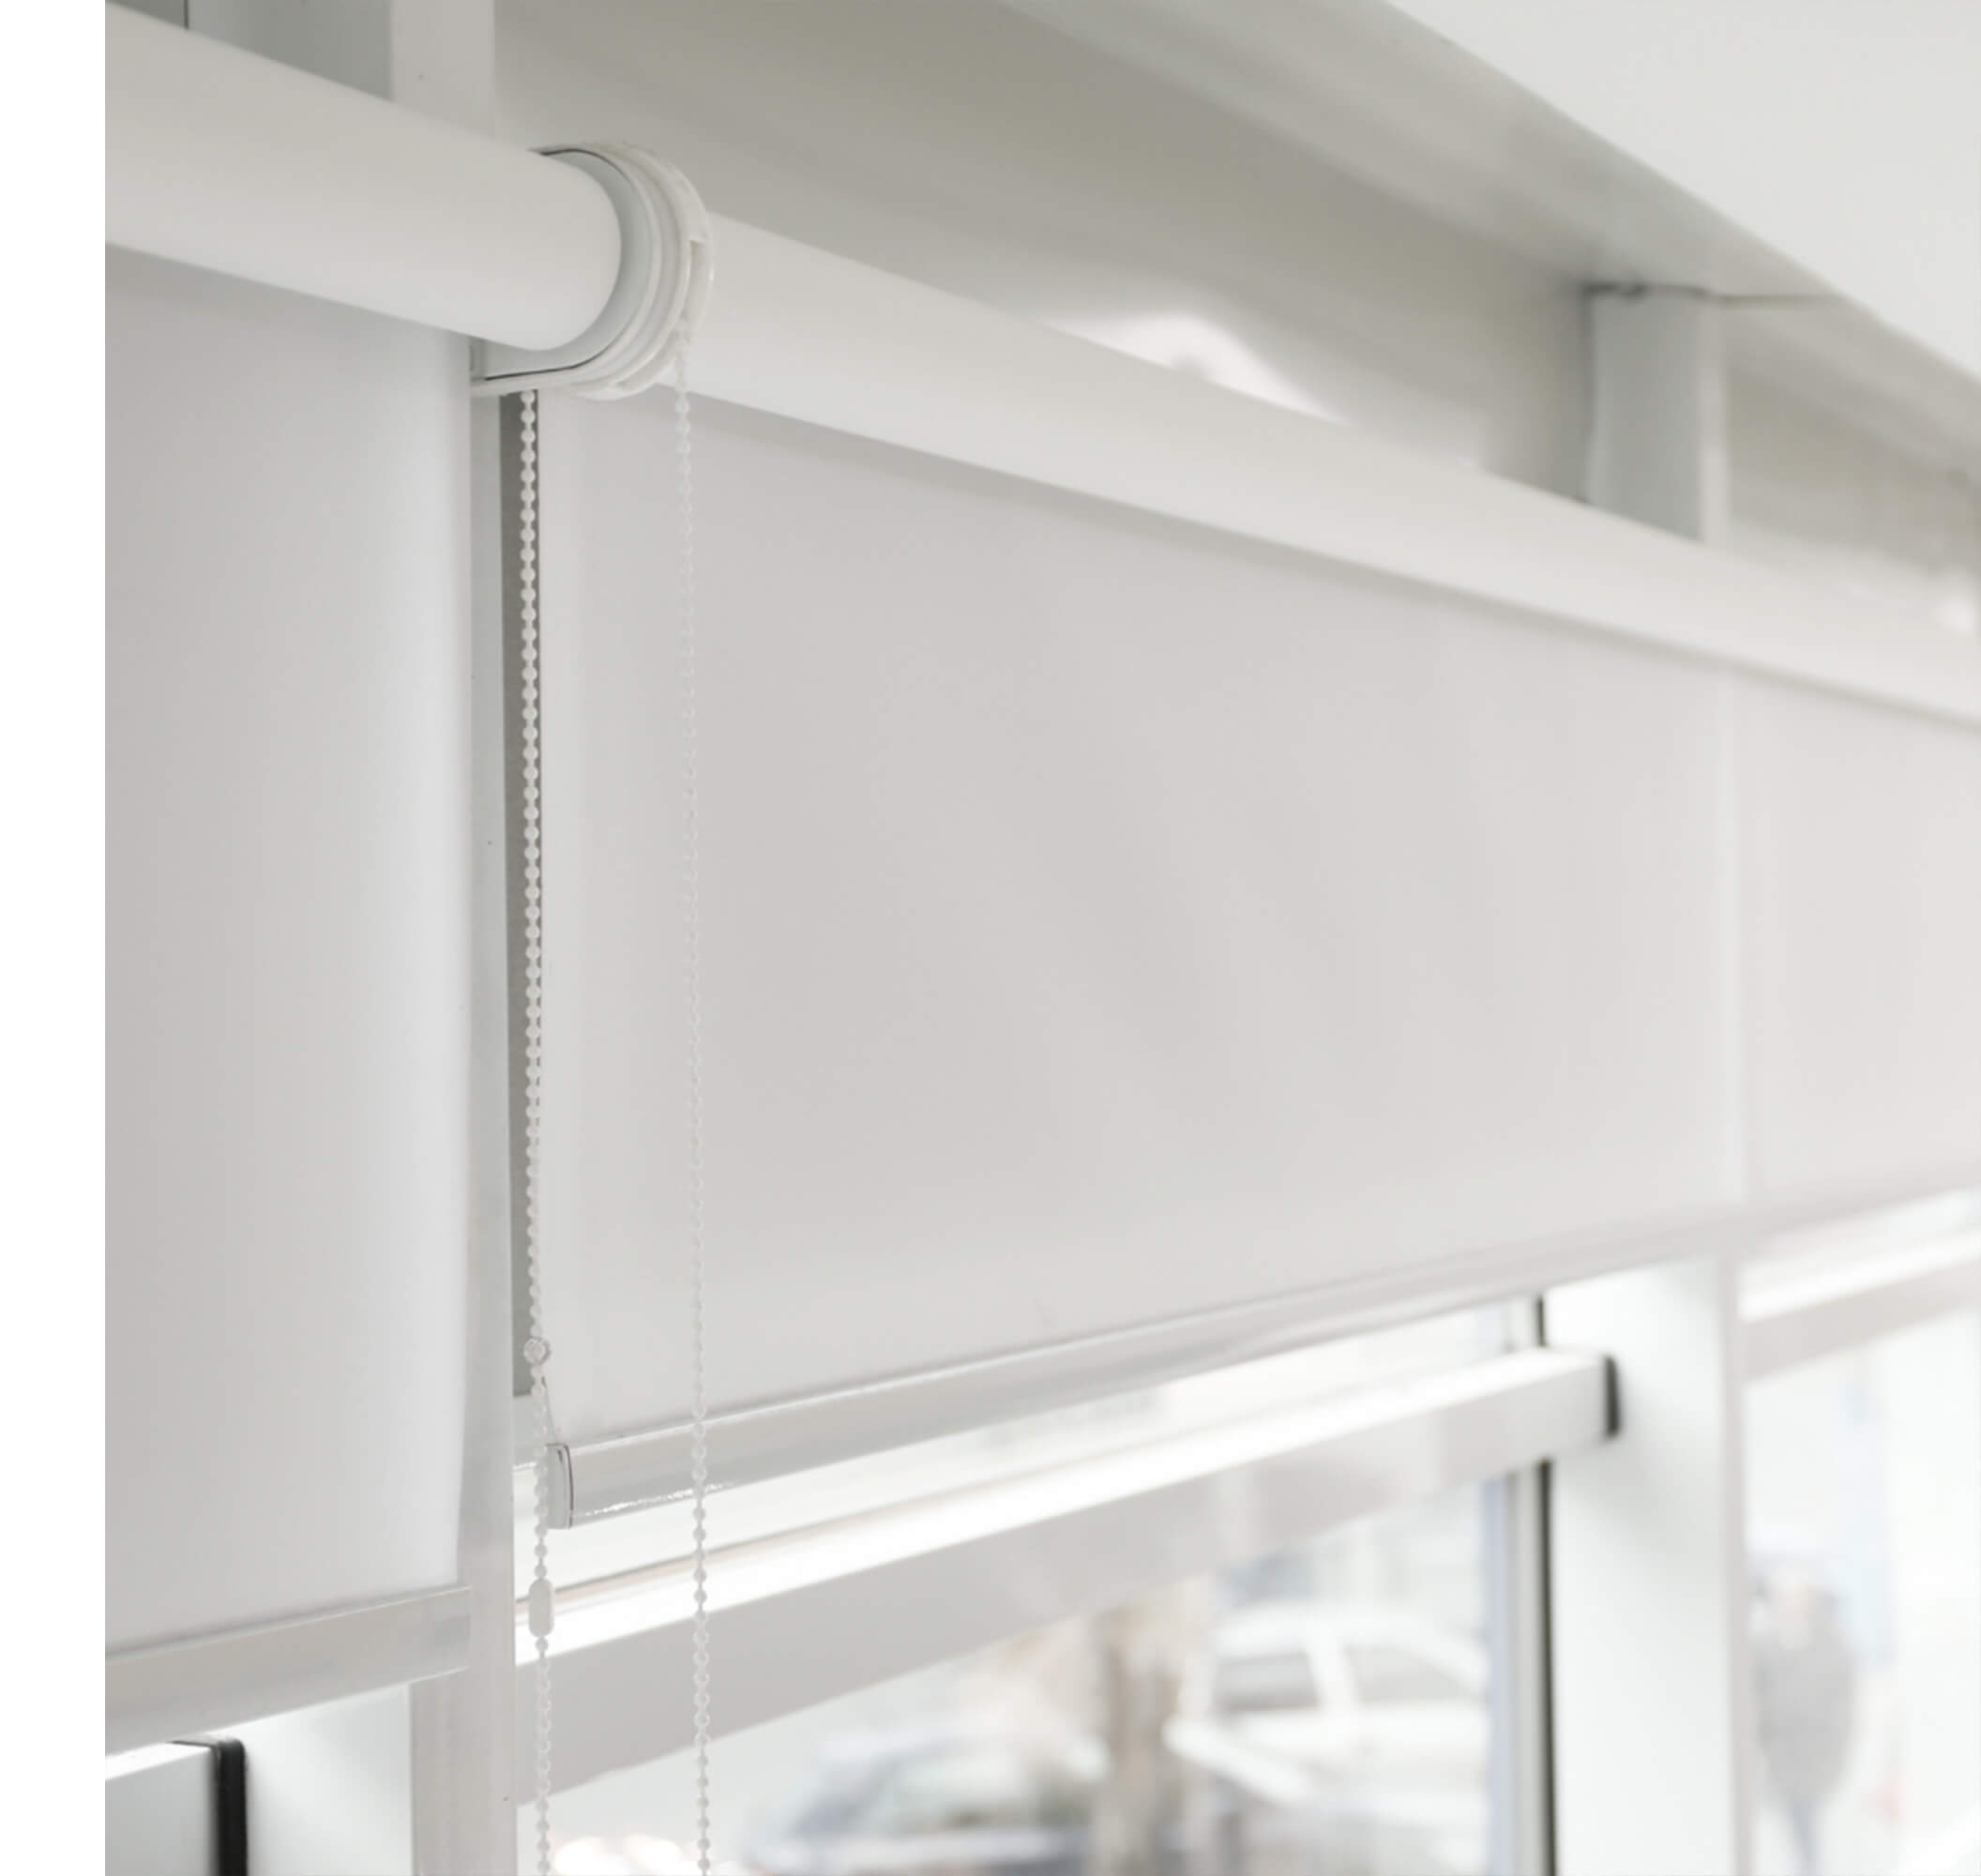 Dimout Blinds